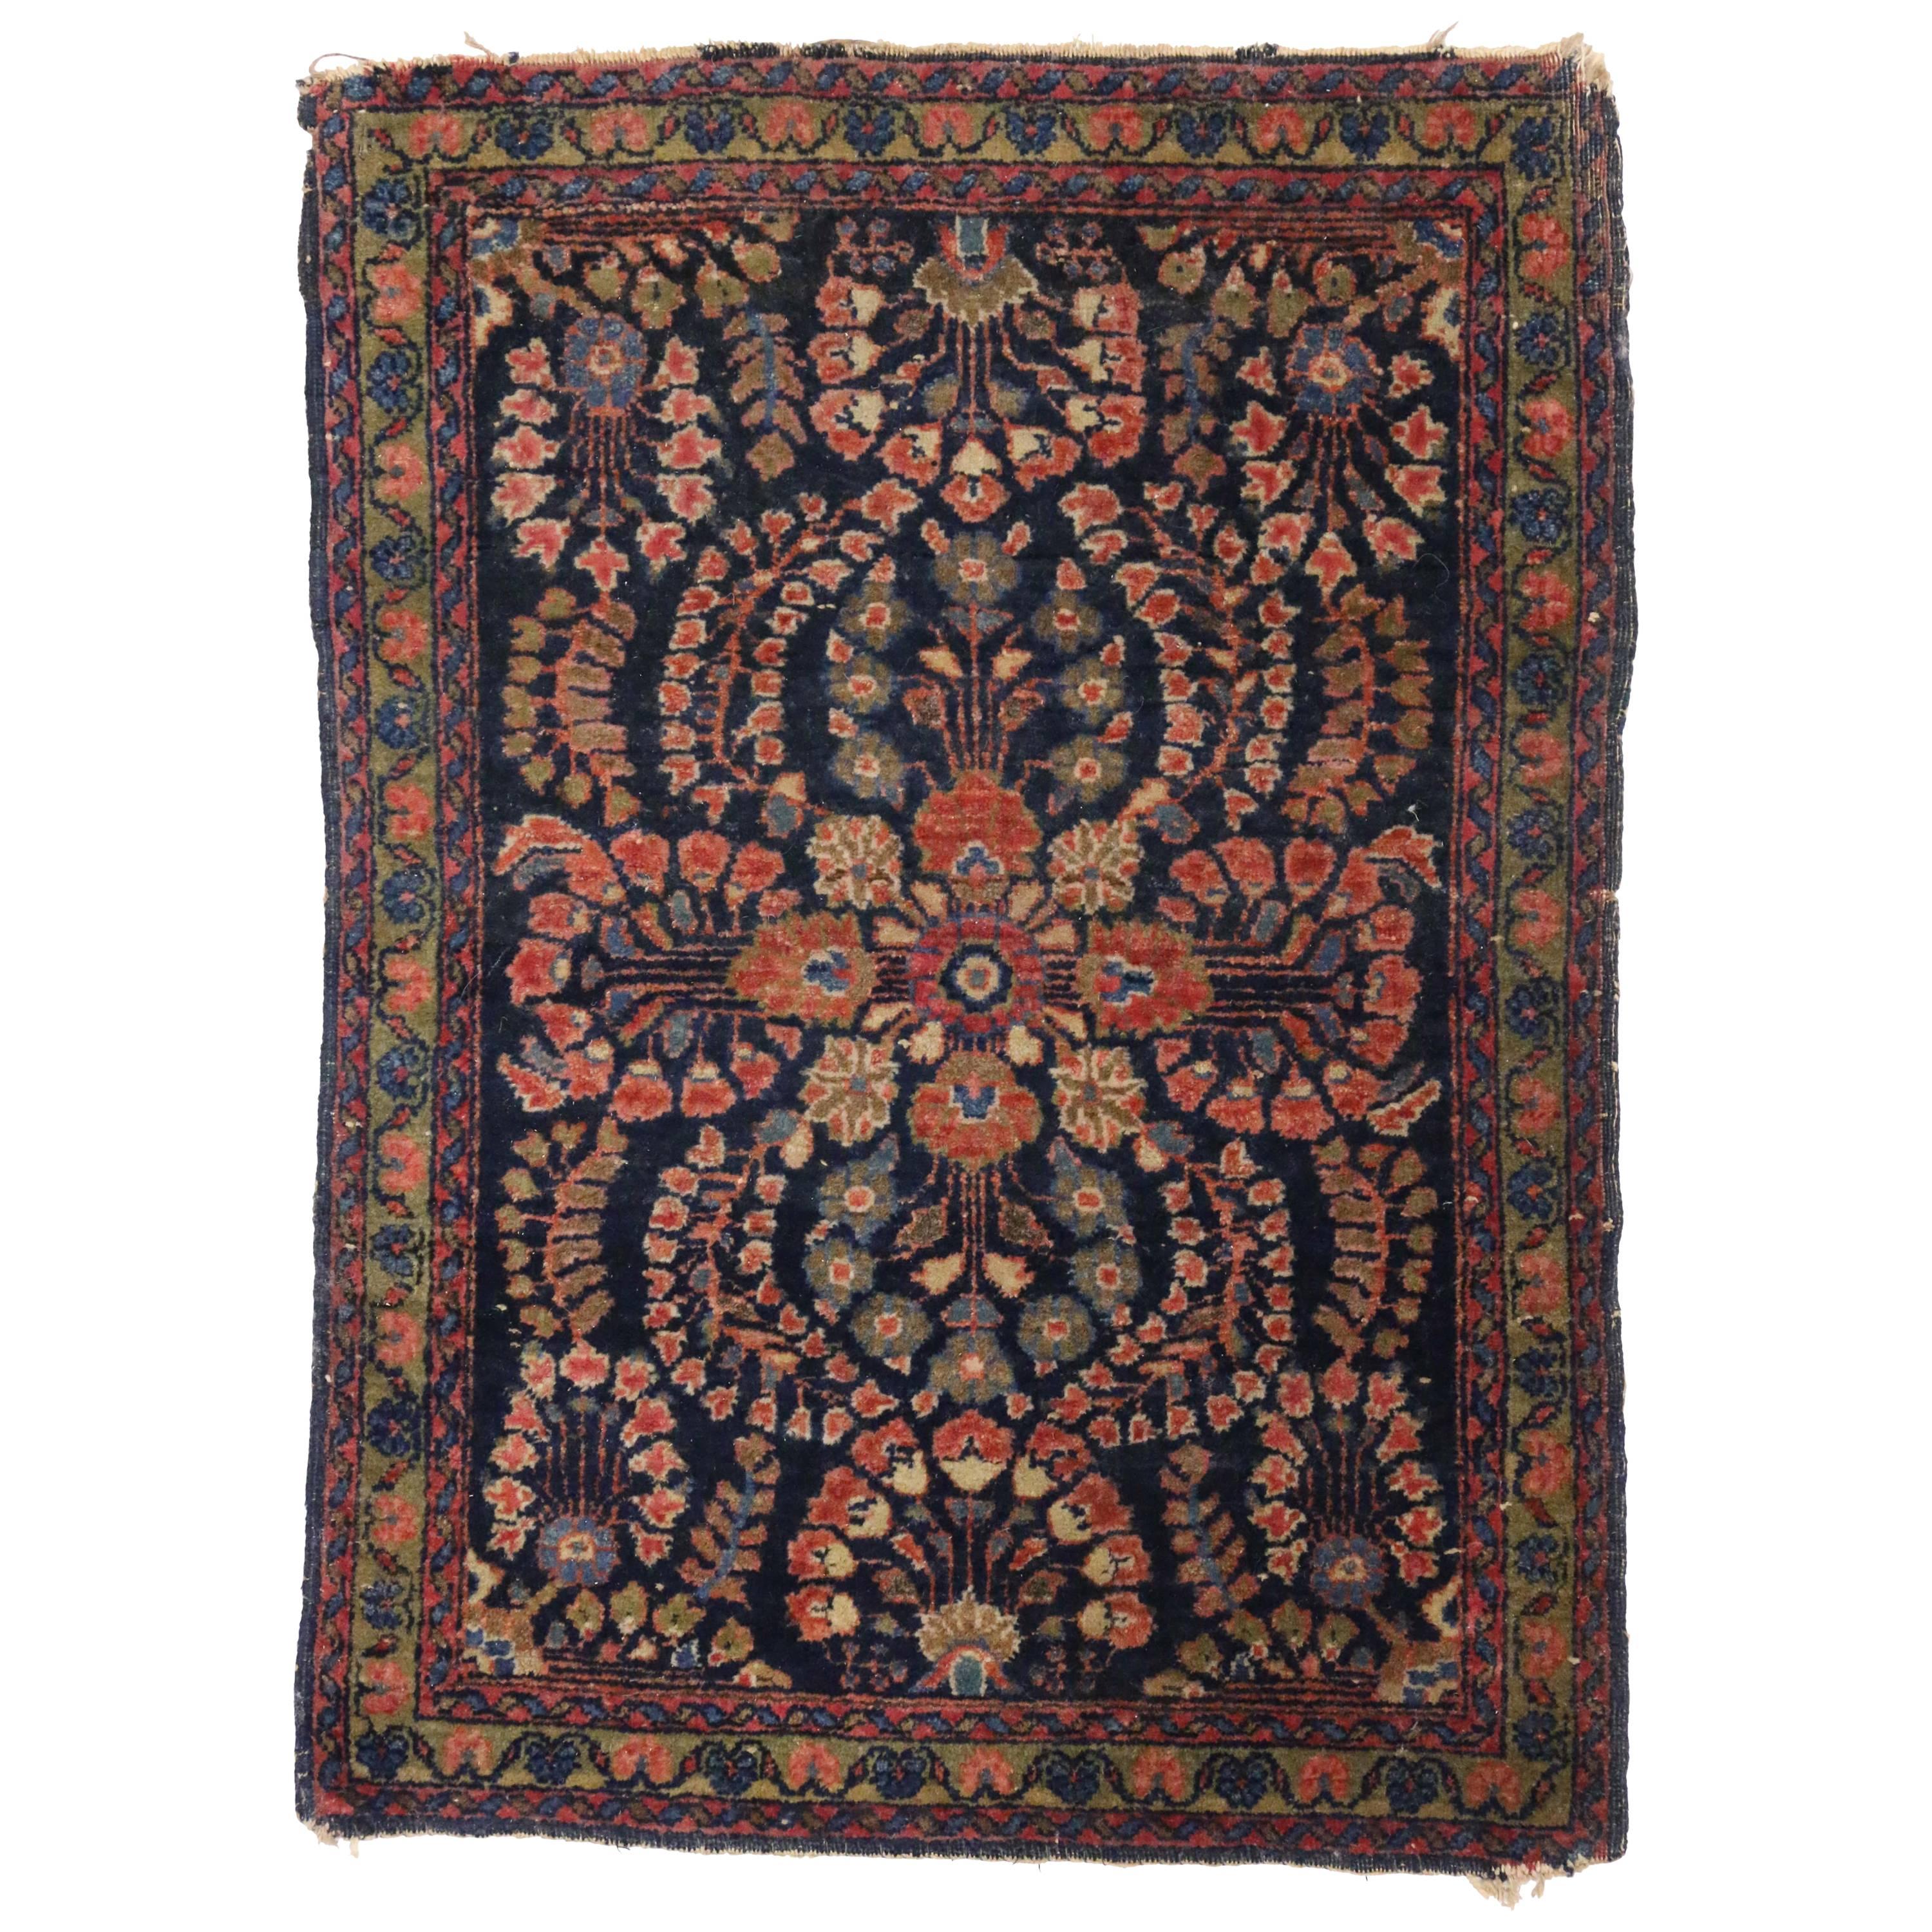 Antique Persian Sarouk Accent Rug, Small Persian Rug with Modern Victorian Style